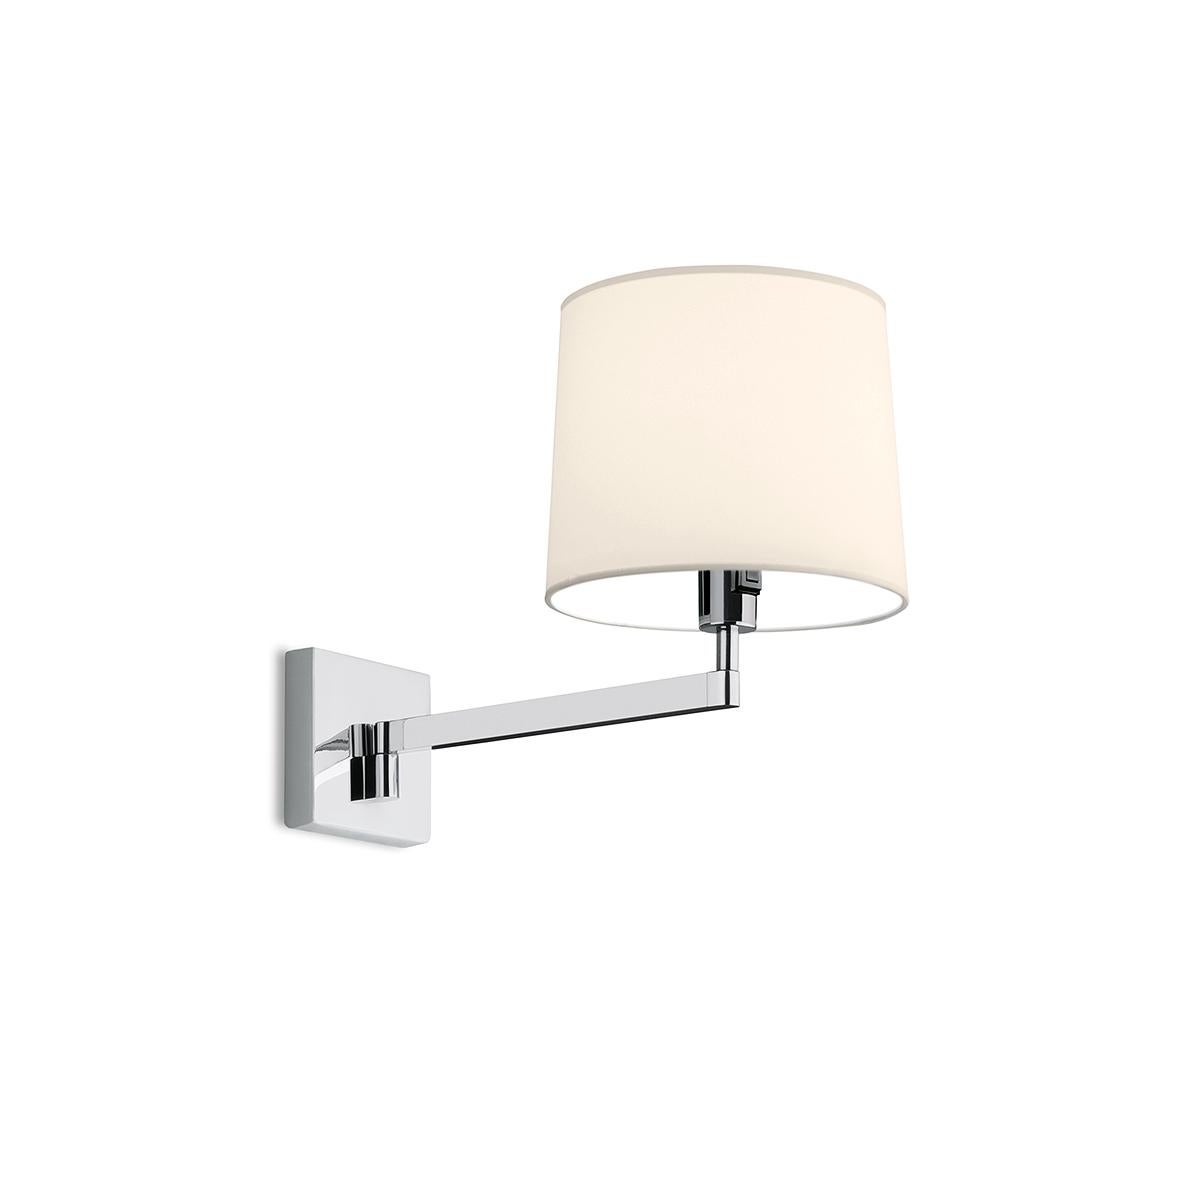 The swing wall sconce collection was updated to feature a new, clean look, as well as 2 new finishes. Each member of this family possesses a jointed arm allowing for a wide 180° range of motion for directional ambient illumination. Reference 0514